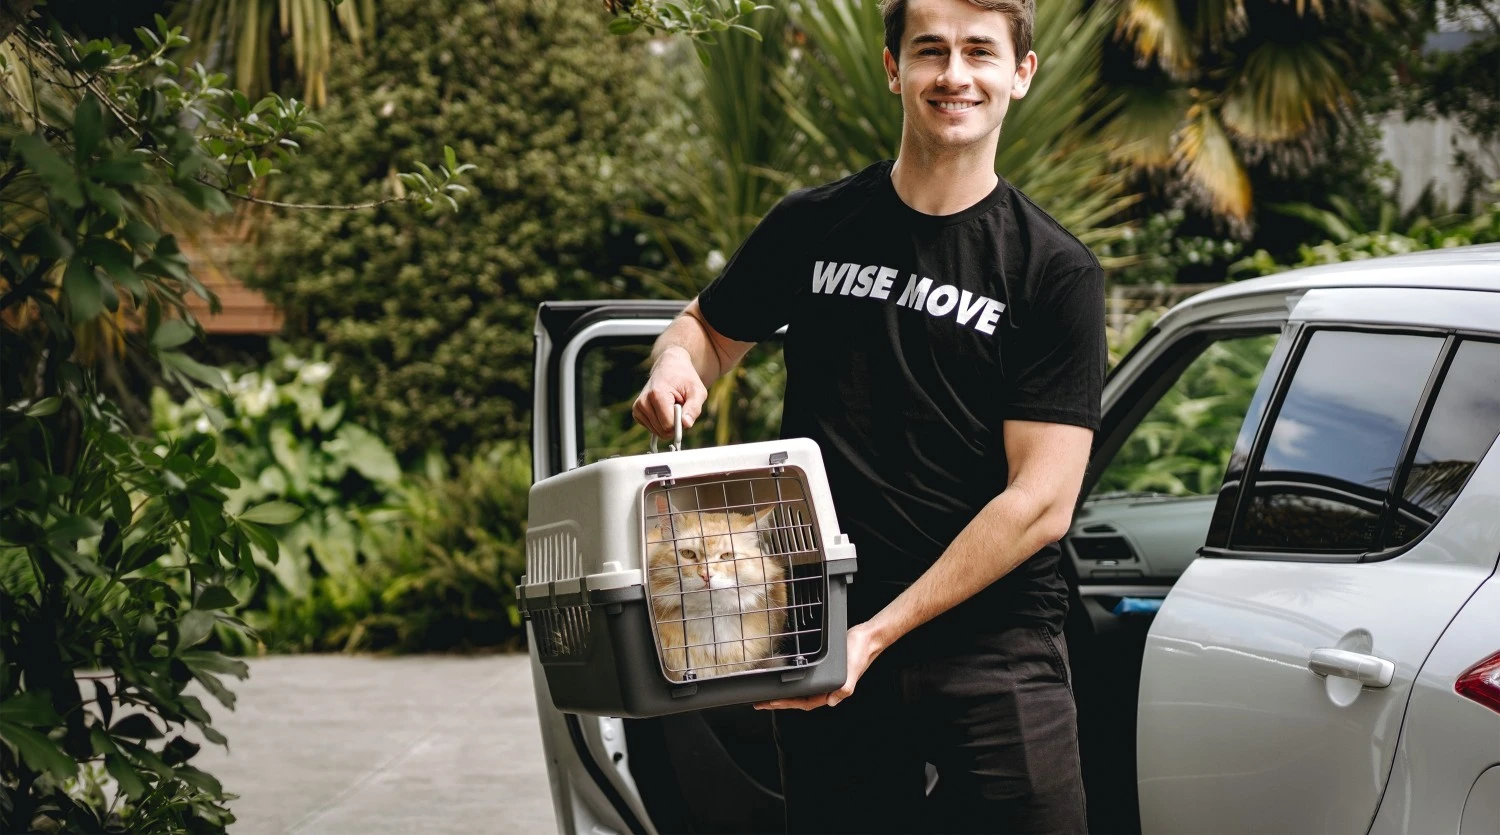 How Can I Make Sure My Pet Is Transported Safely?